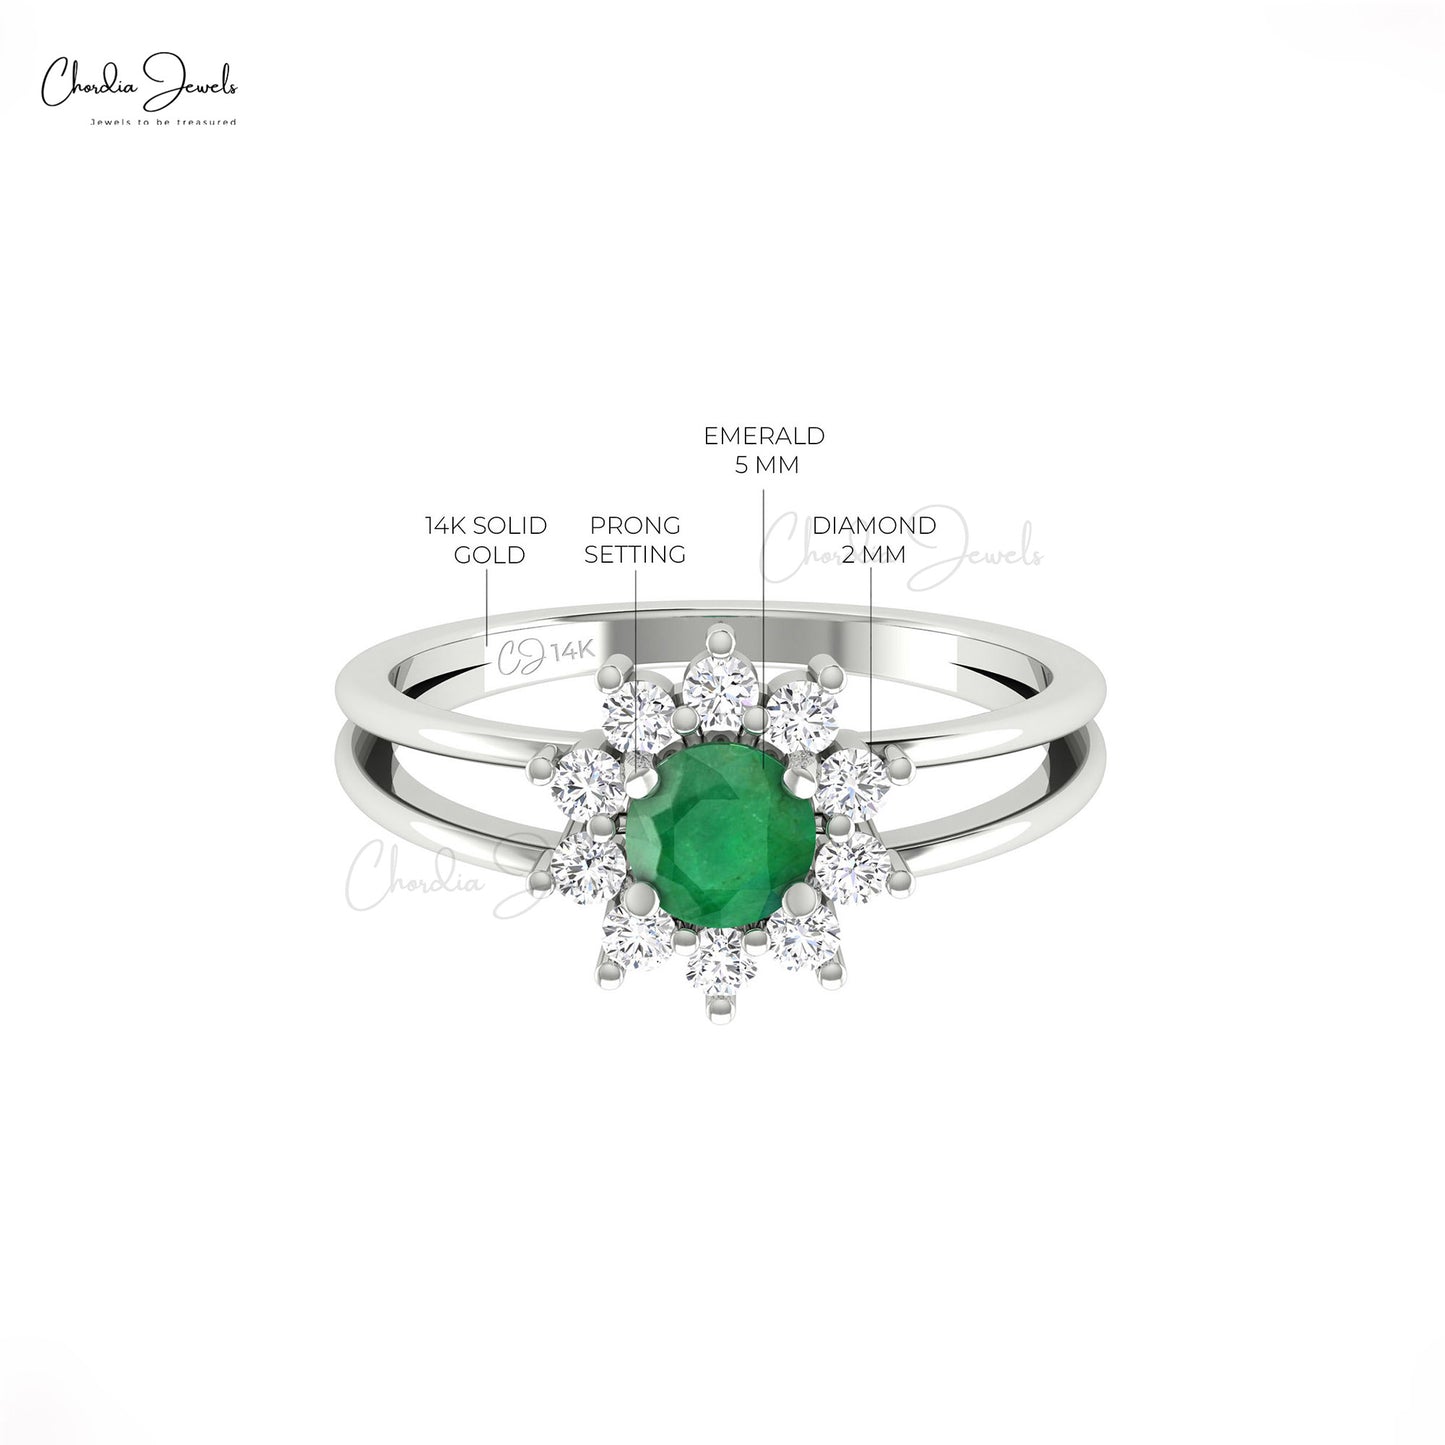 Make a statement with our emerald floral ring.